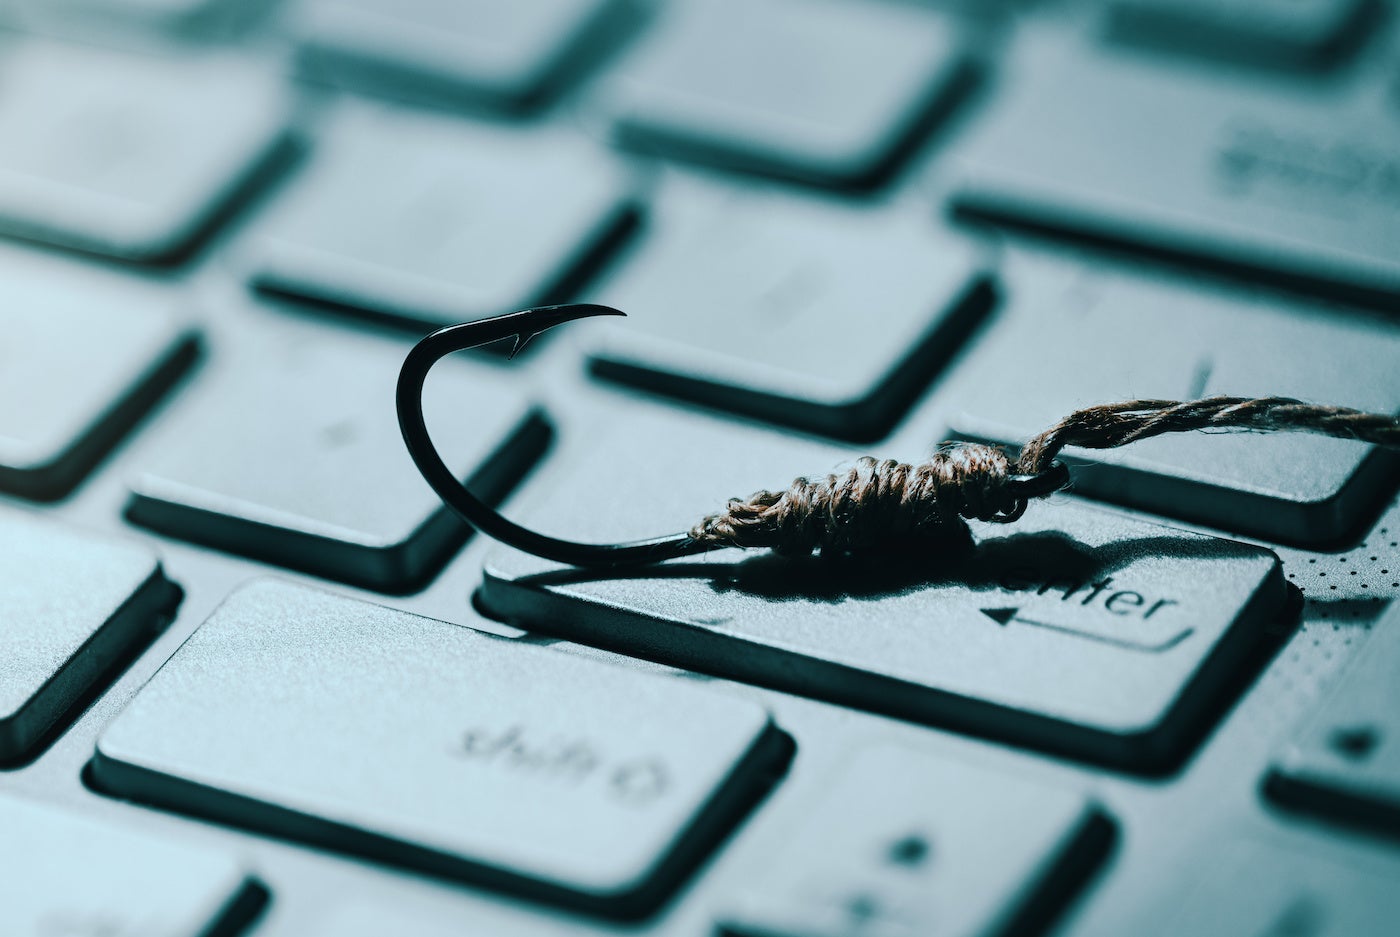 50% of companies had spearphishing puncture wounds in 2022